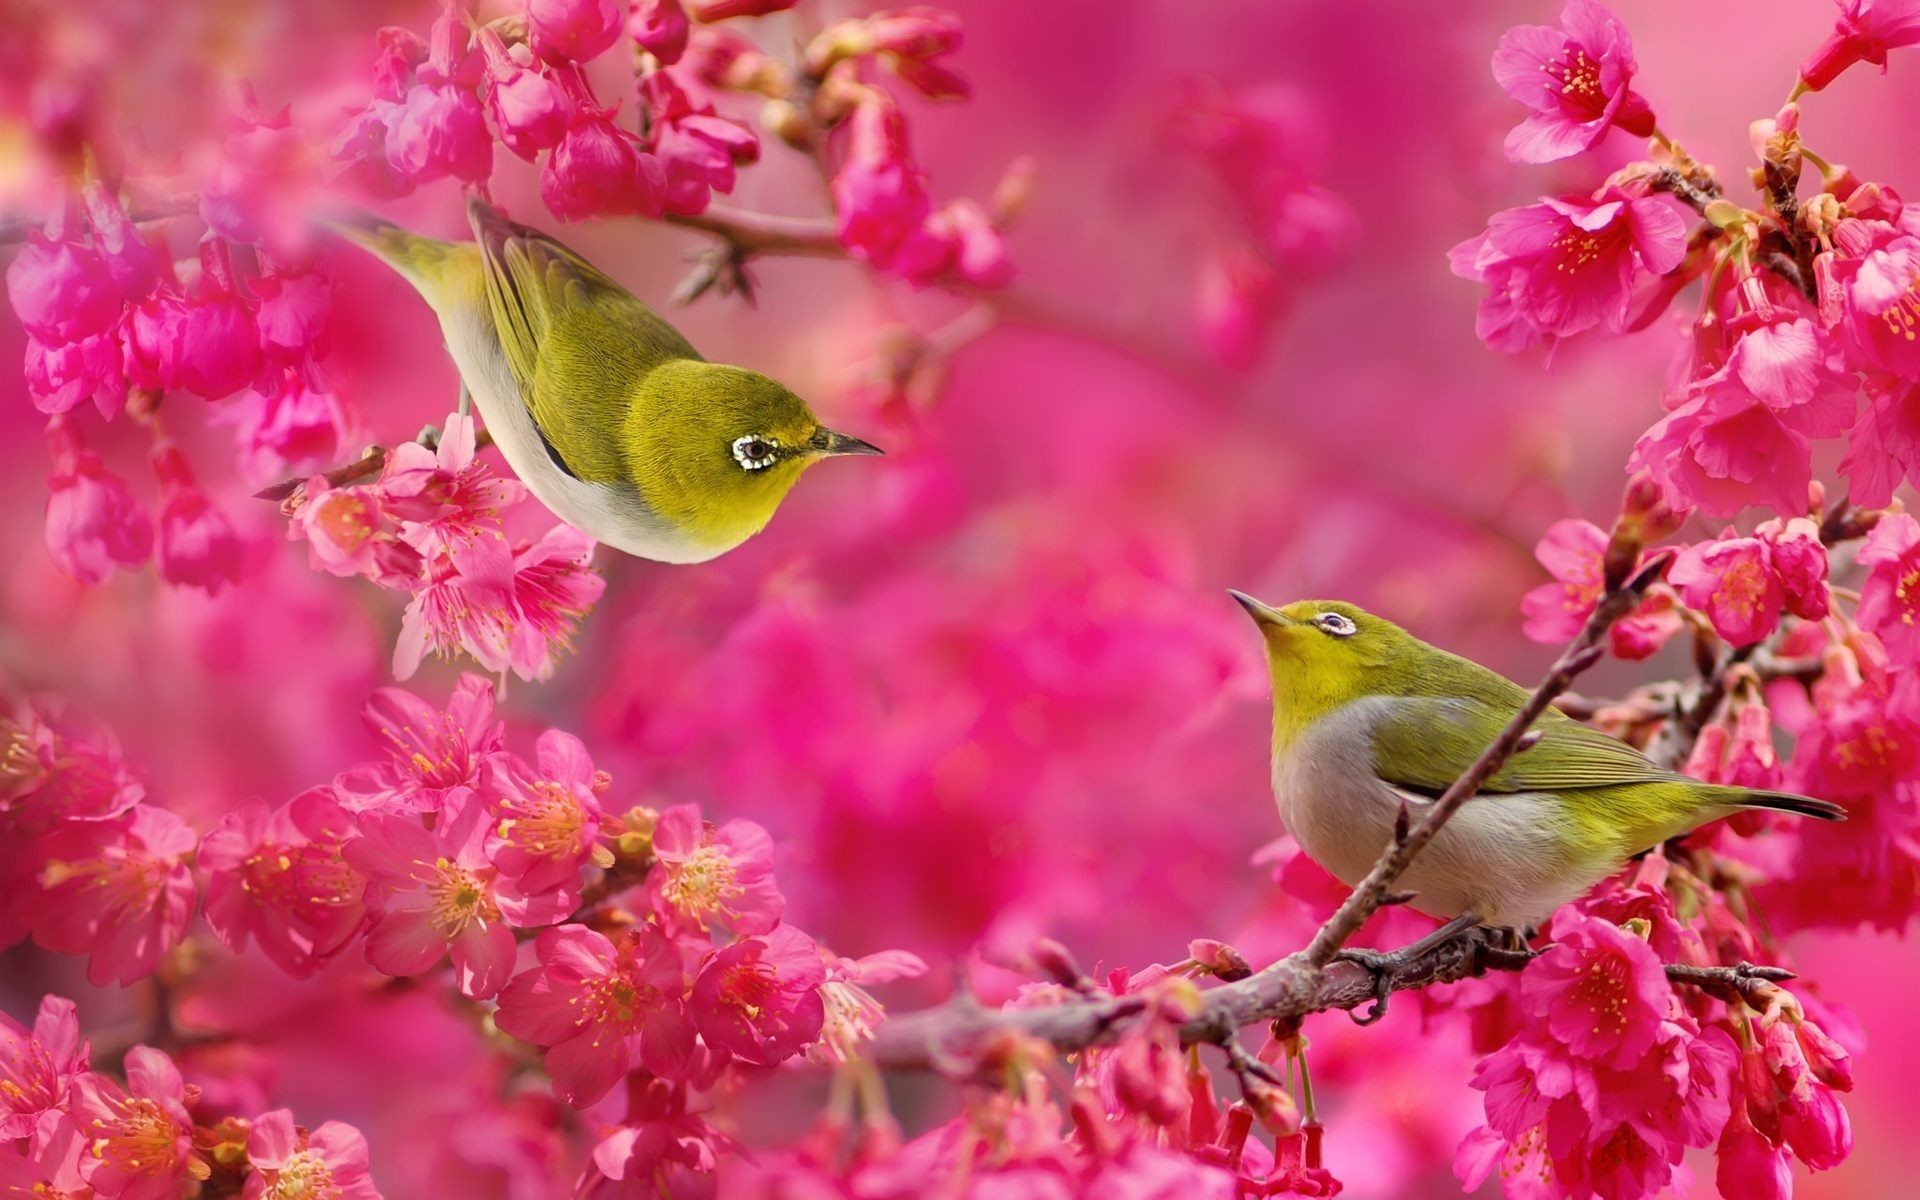 Wallpaper Birds And Flowers 61 images